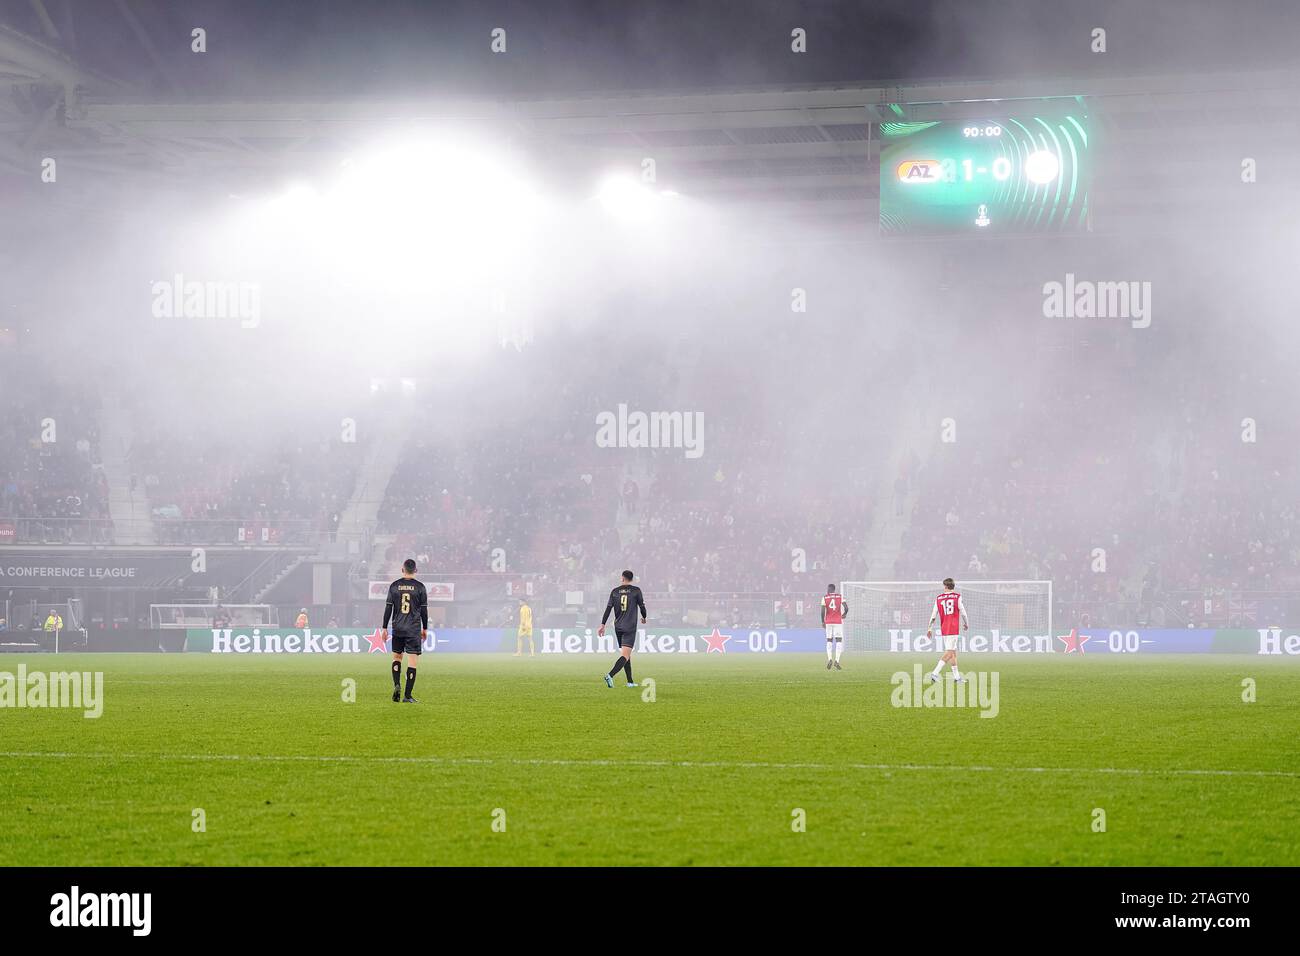 Alkmaar, Niederlande. 30th Nov, 2023. Stadium filled with smoke due to fireworks used by the fans during the Group E - UEFA Europa Conference League 2023/24 match between AZ Alkmaar and HSK Zrinjski on November 30, 2023 in Alkmaar, Netherlands Credit: dpa/Alamy Live News Stock Photo